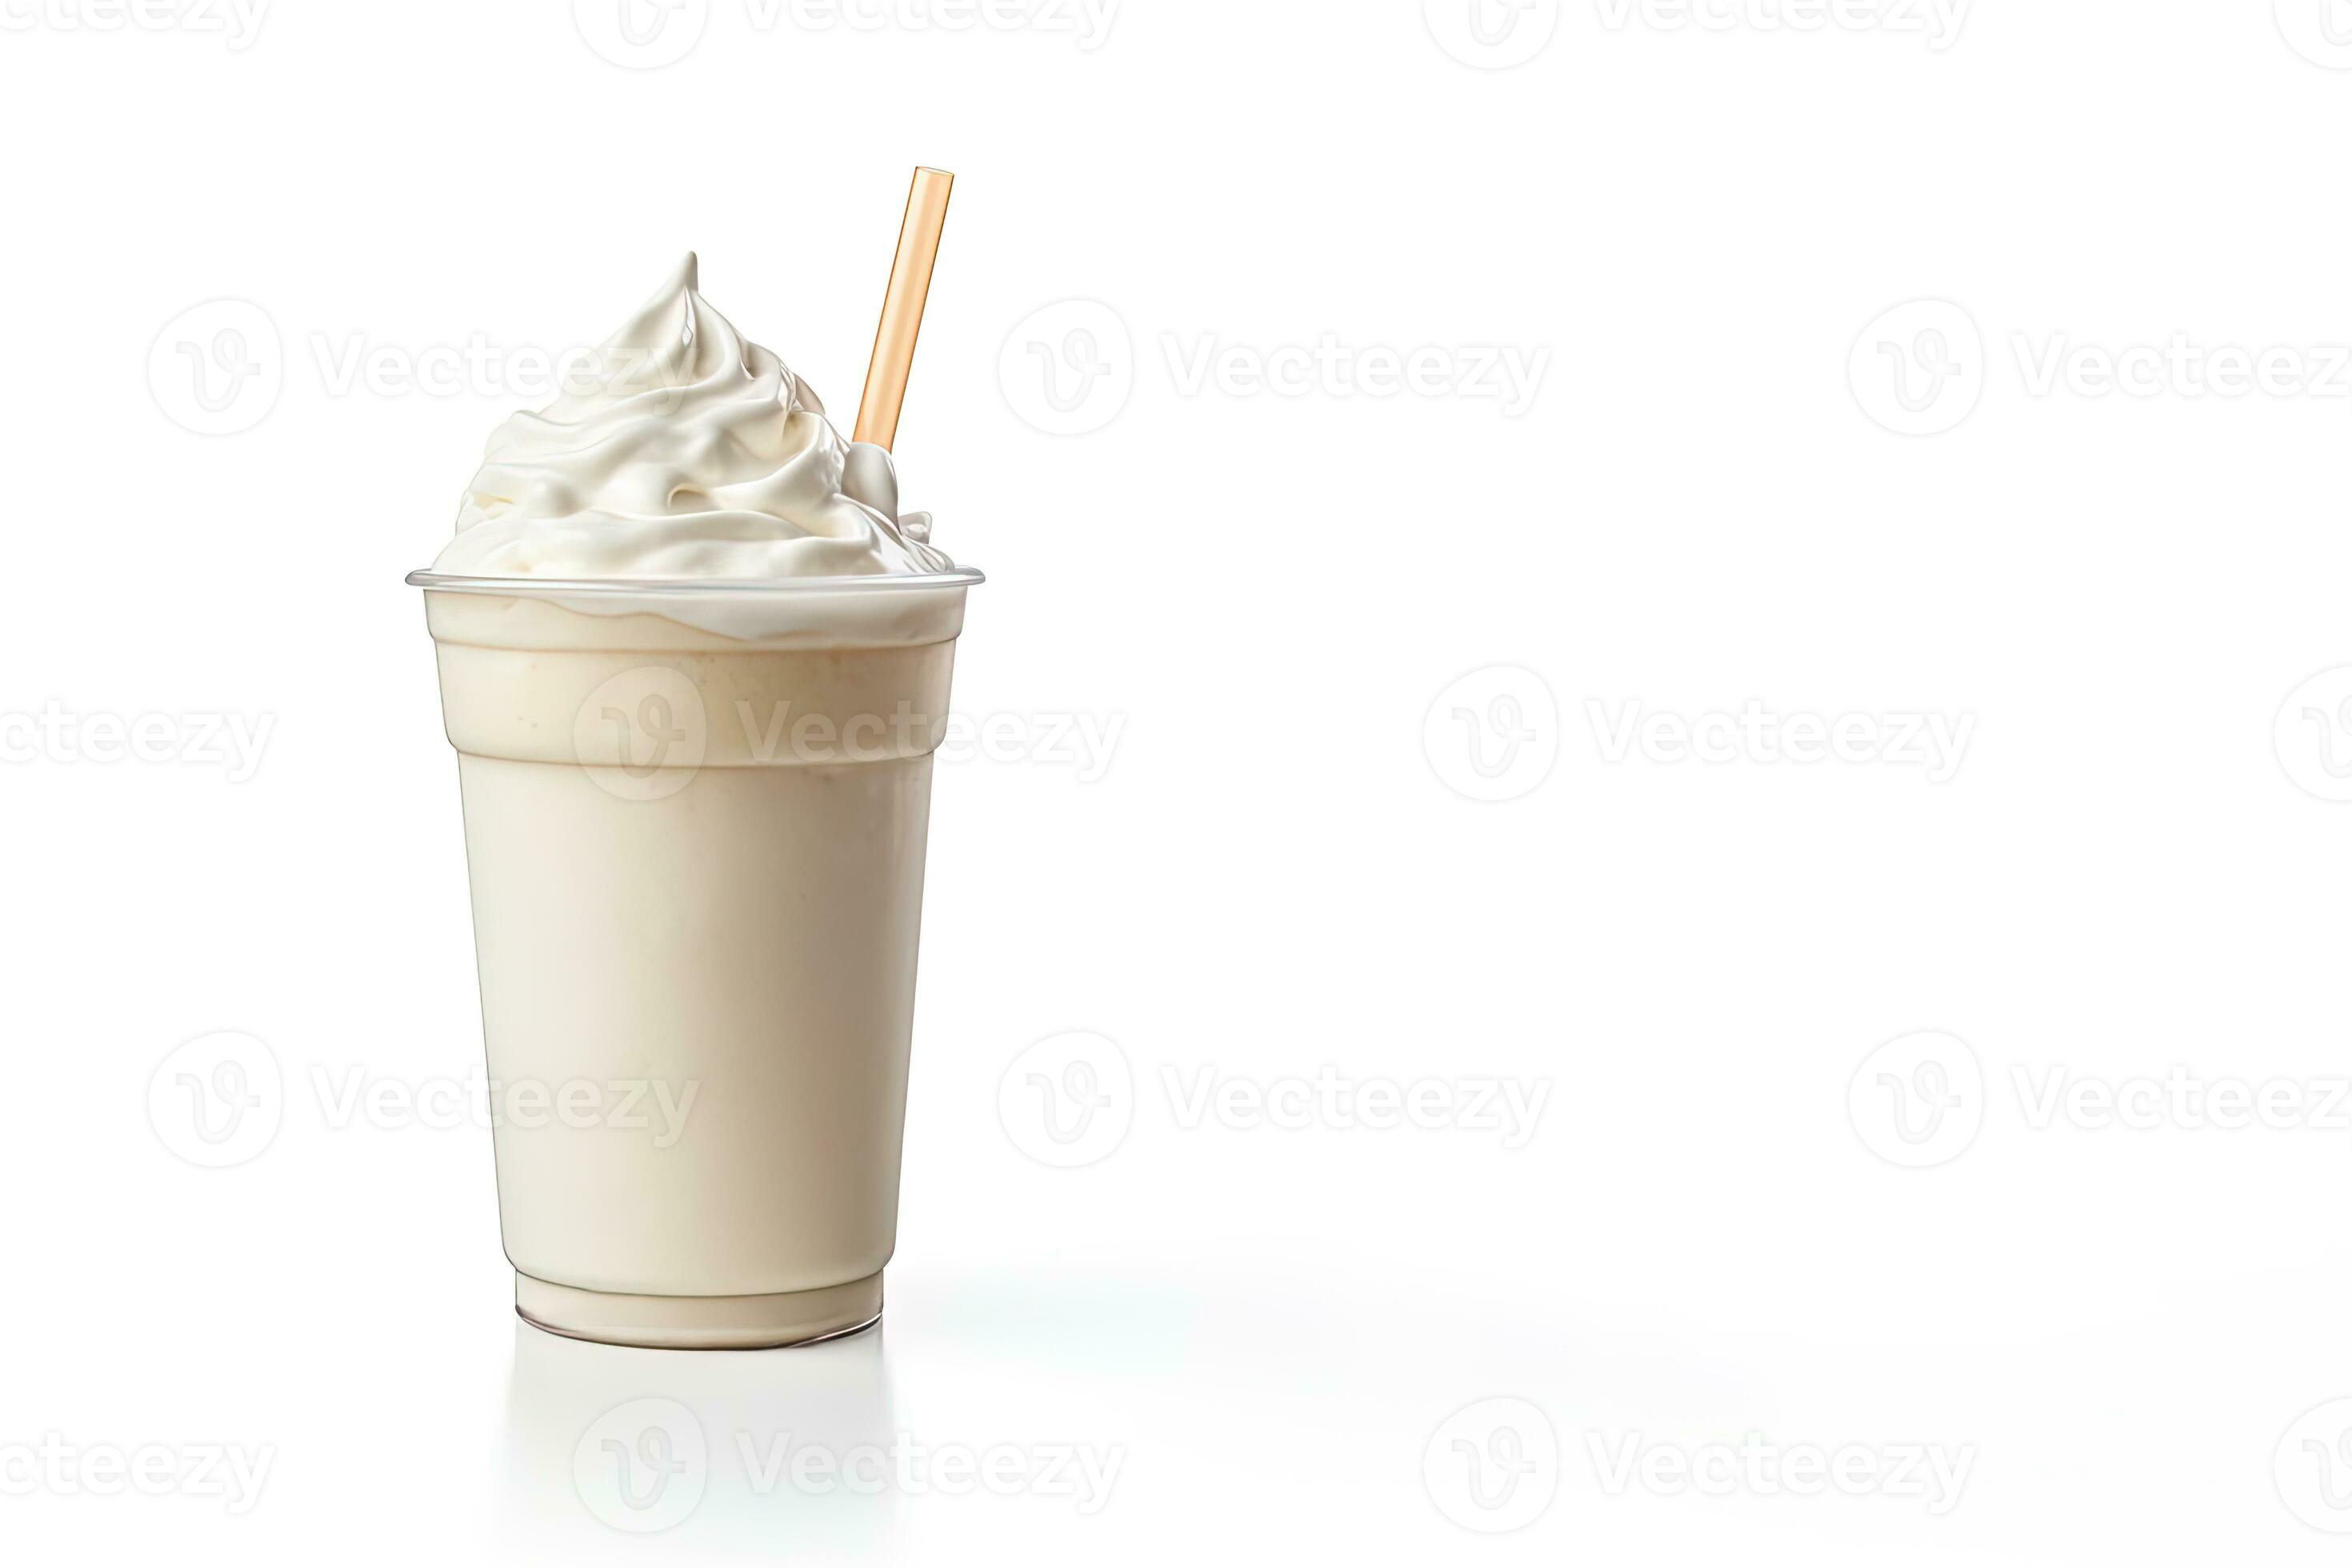 https://static.vecteezy.com/system/resources/previews/026/282/360/large_2x/vanilla-milkshake-in-plastic-takeaway-cup-isolated-on-white-background-with-copy-space-ai-generated-photo.jpg